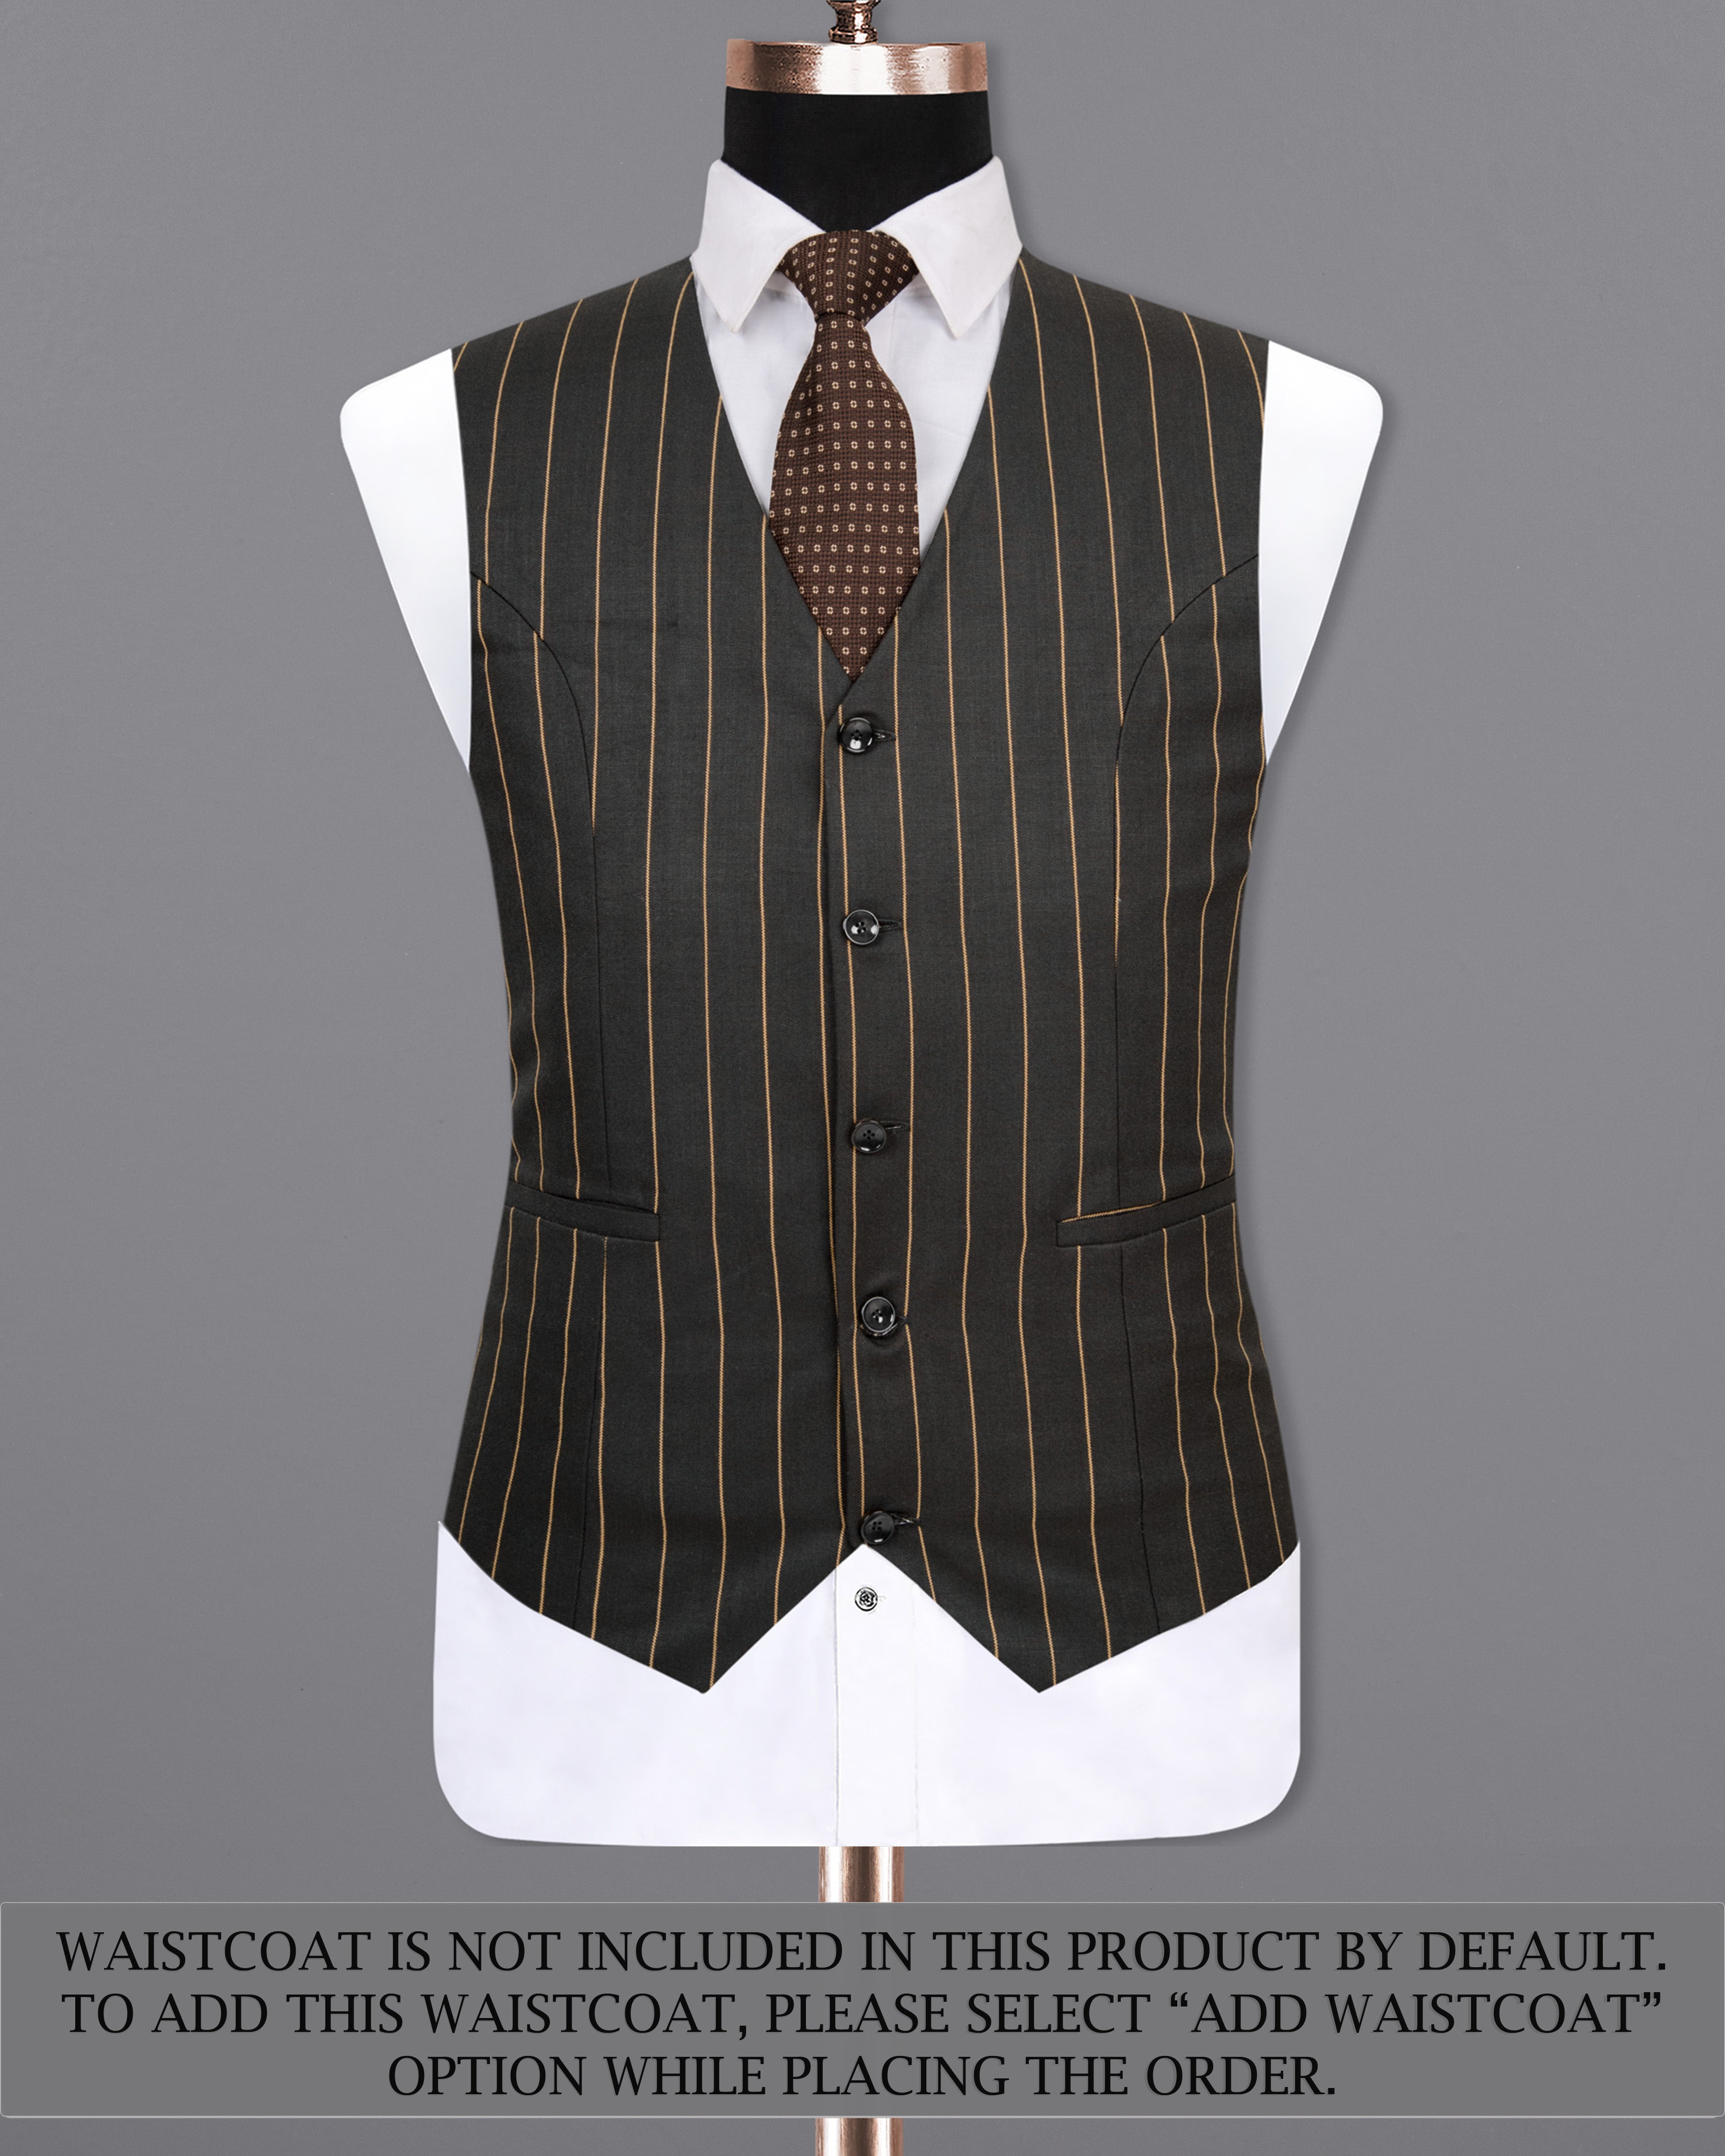 Charcoal Gray with Corvette Yellow Striped Double-Breasted Woolrich Suit